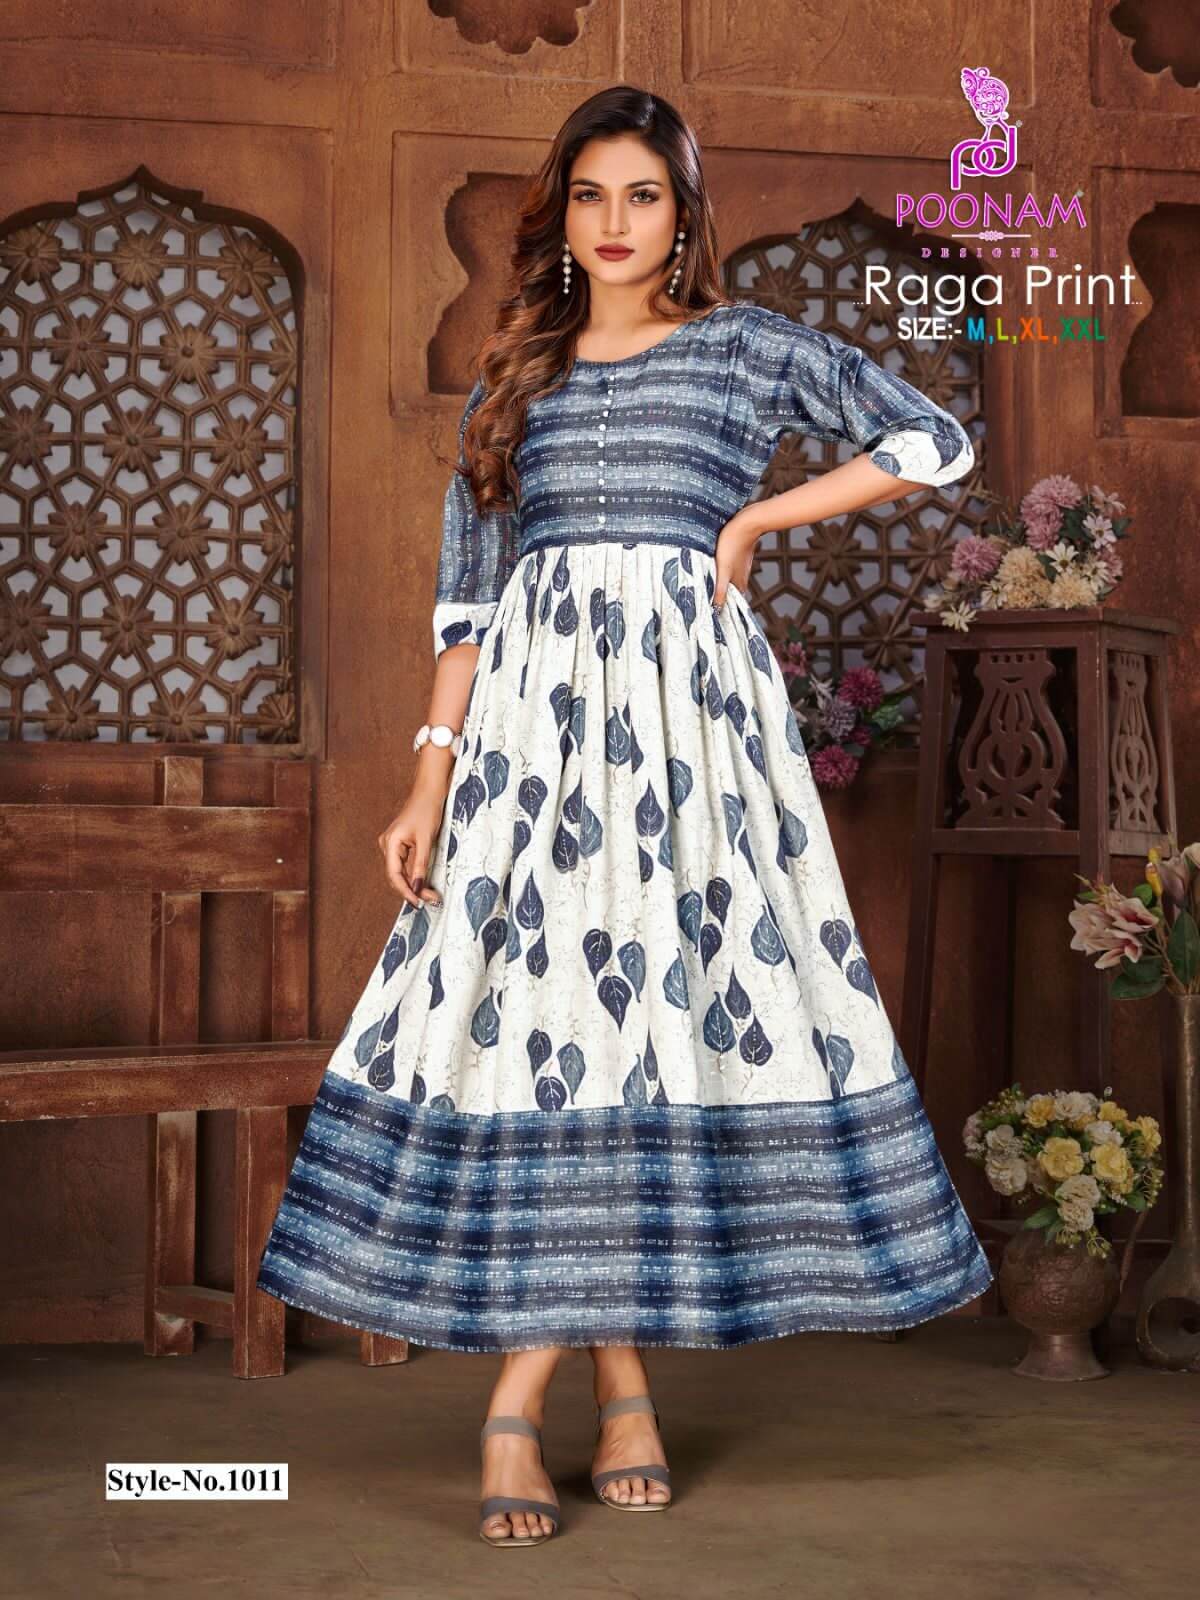 Poonam Raga Print Gowns Catalog collection 8